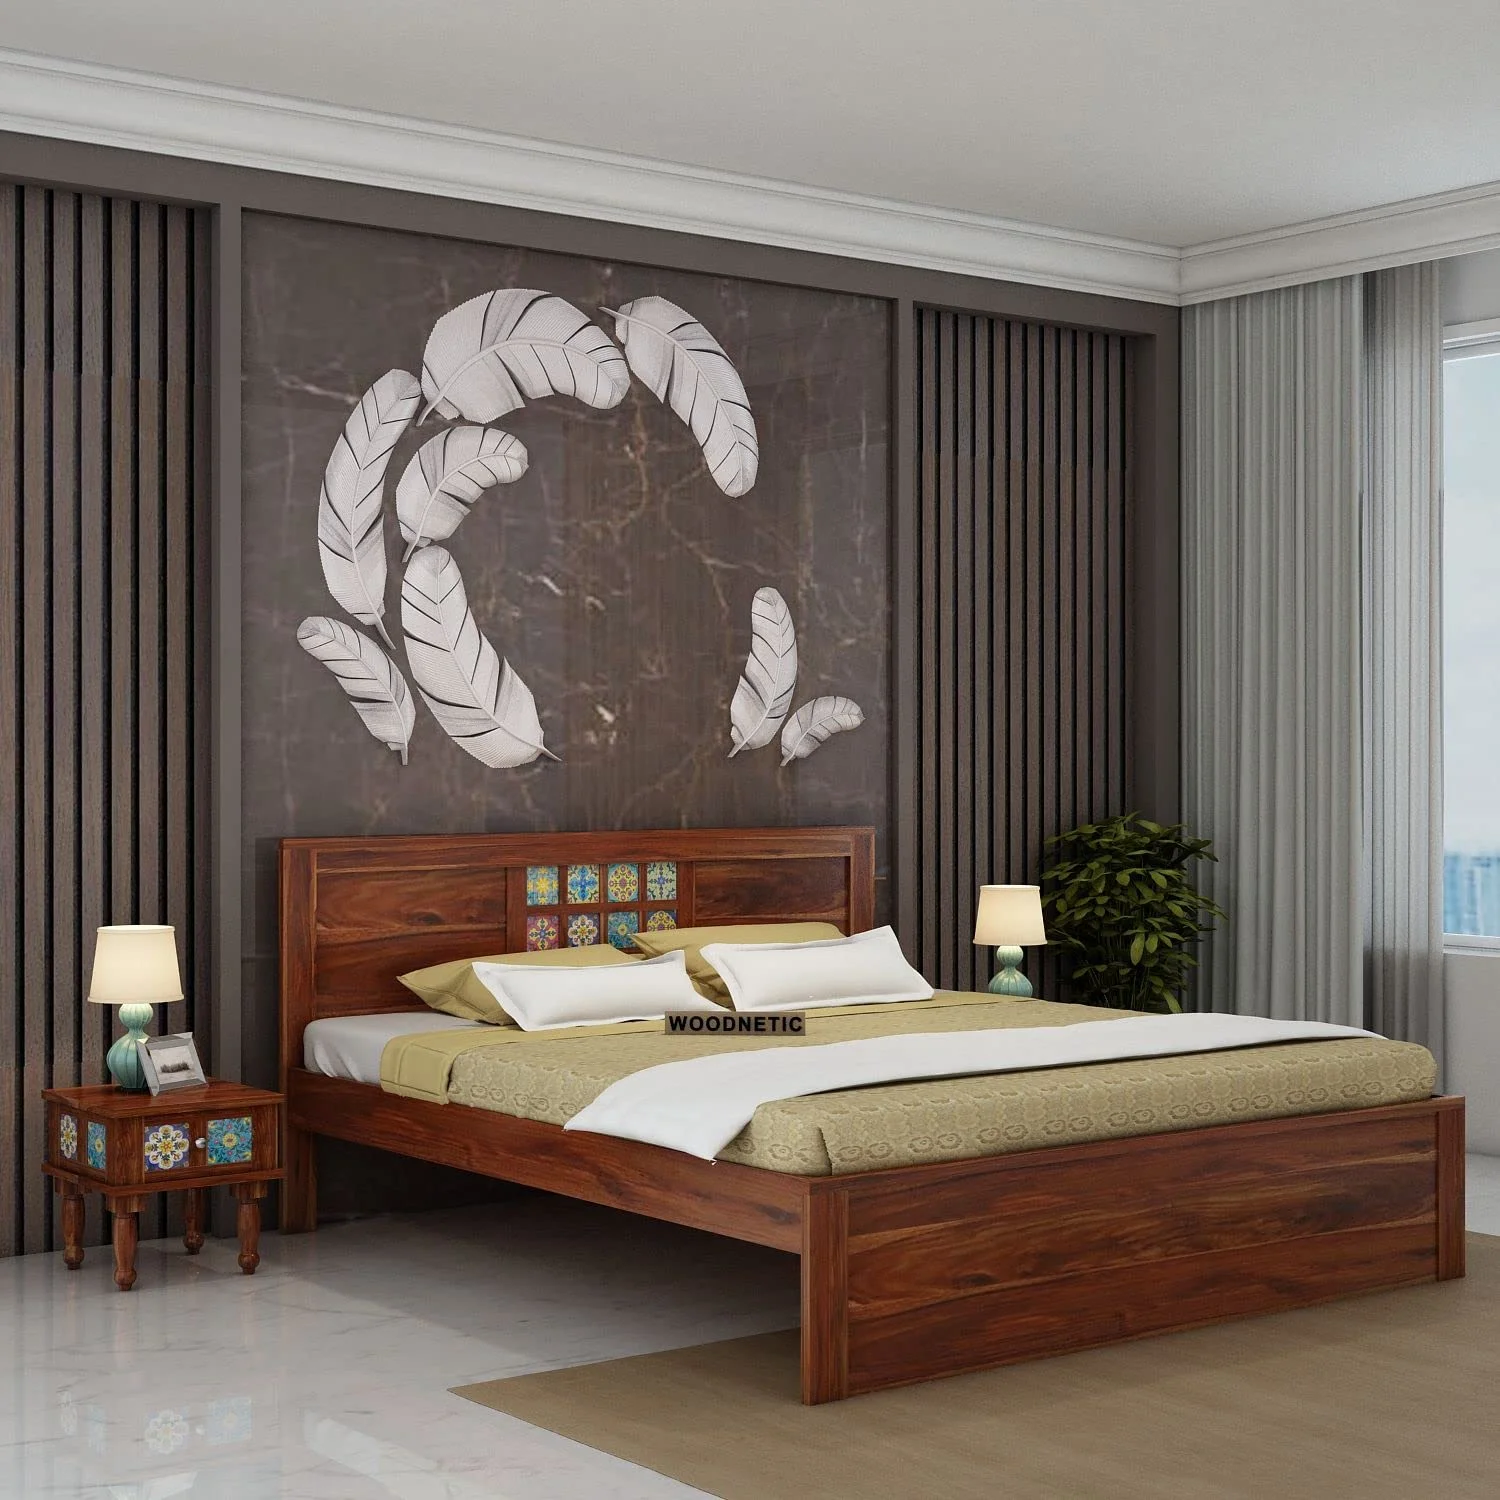 Tips for Selecting Stunning Bedroom Wall and Floor Tiles